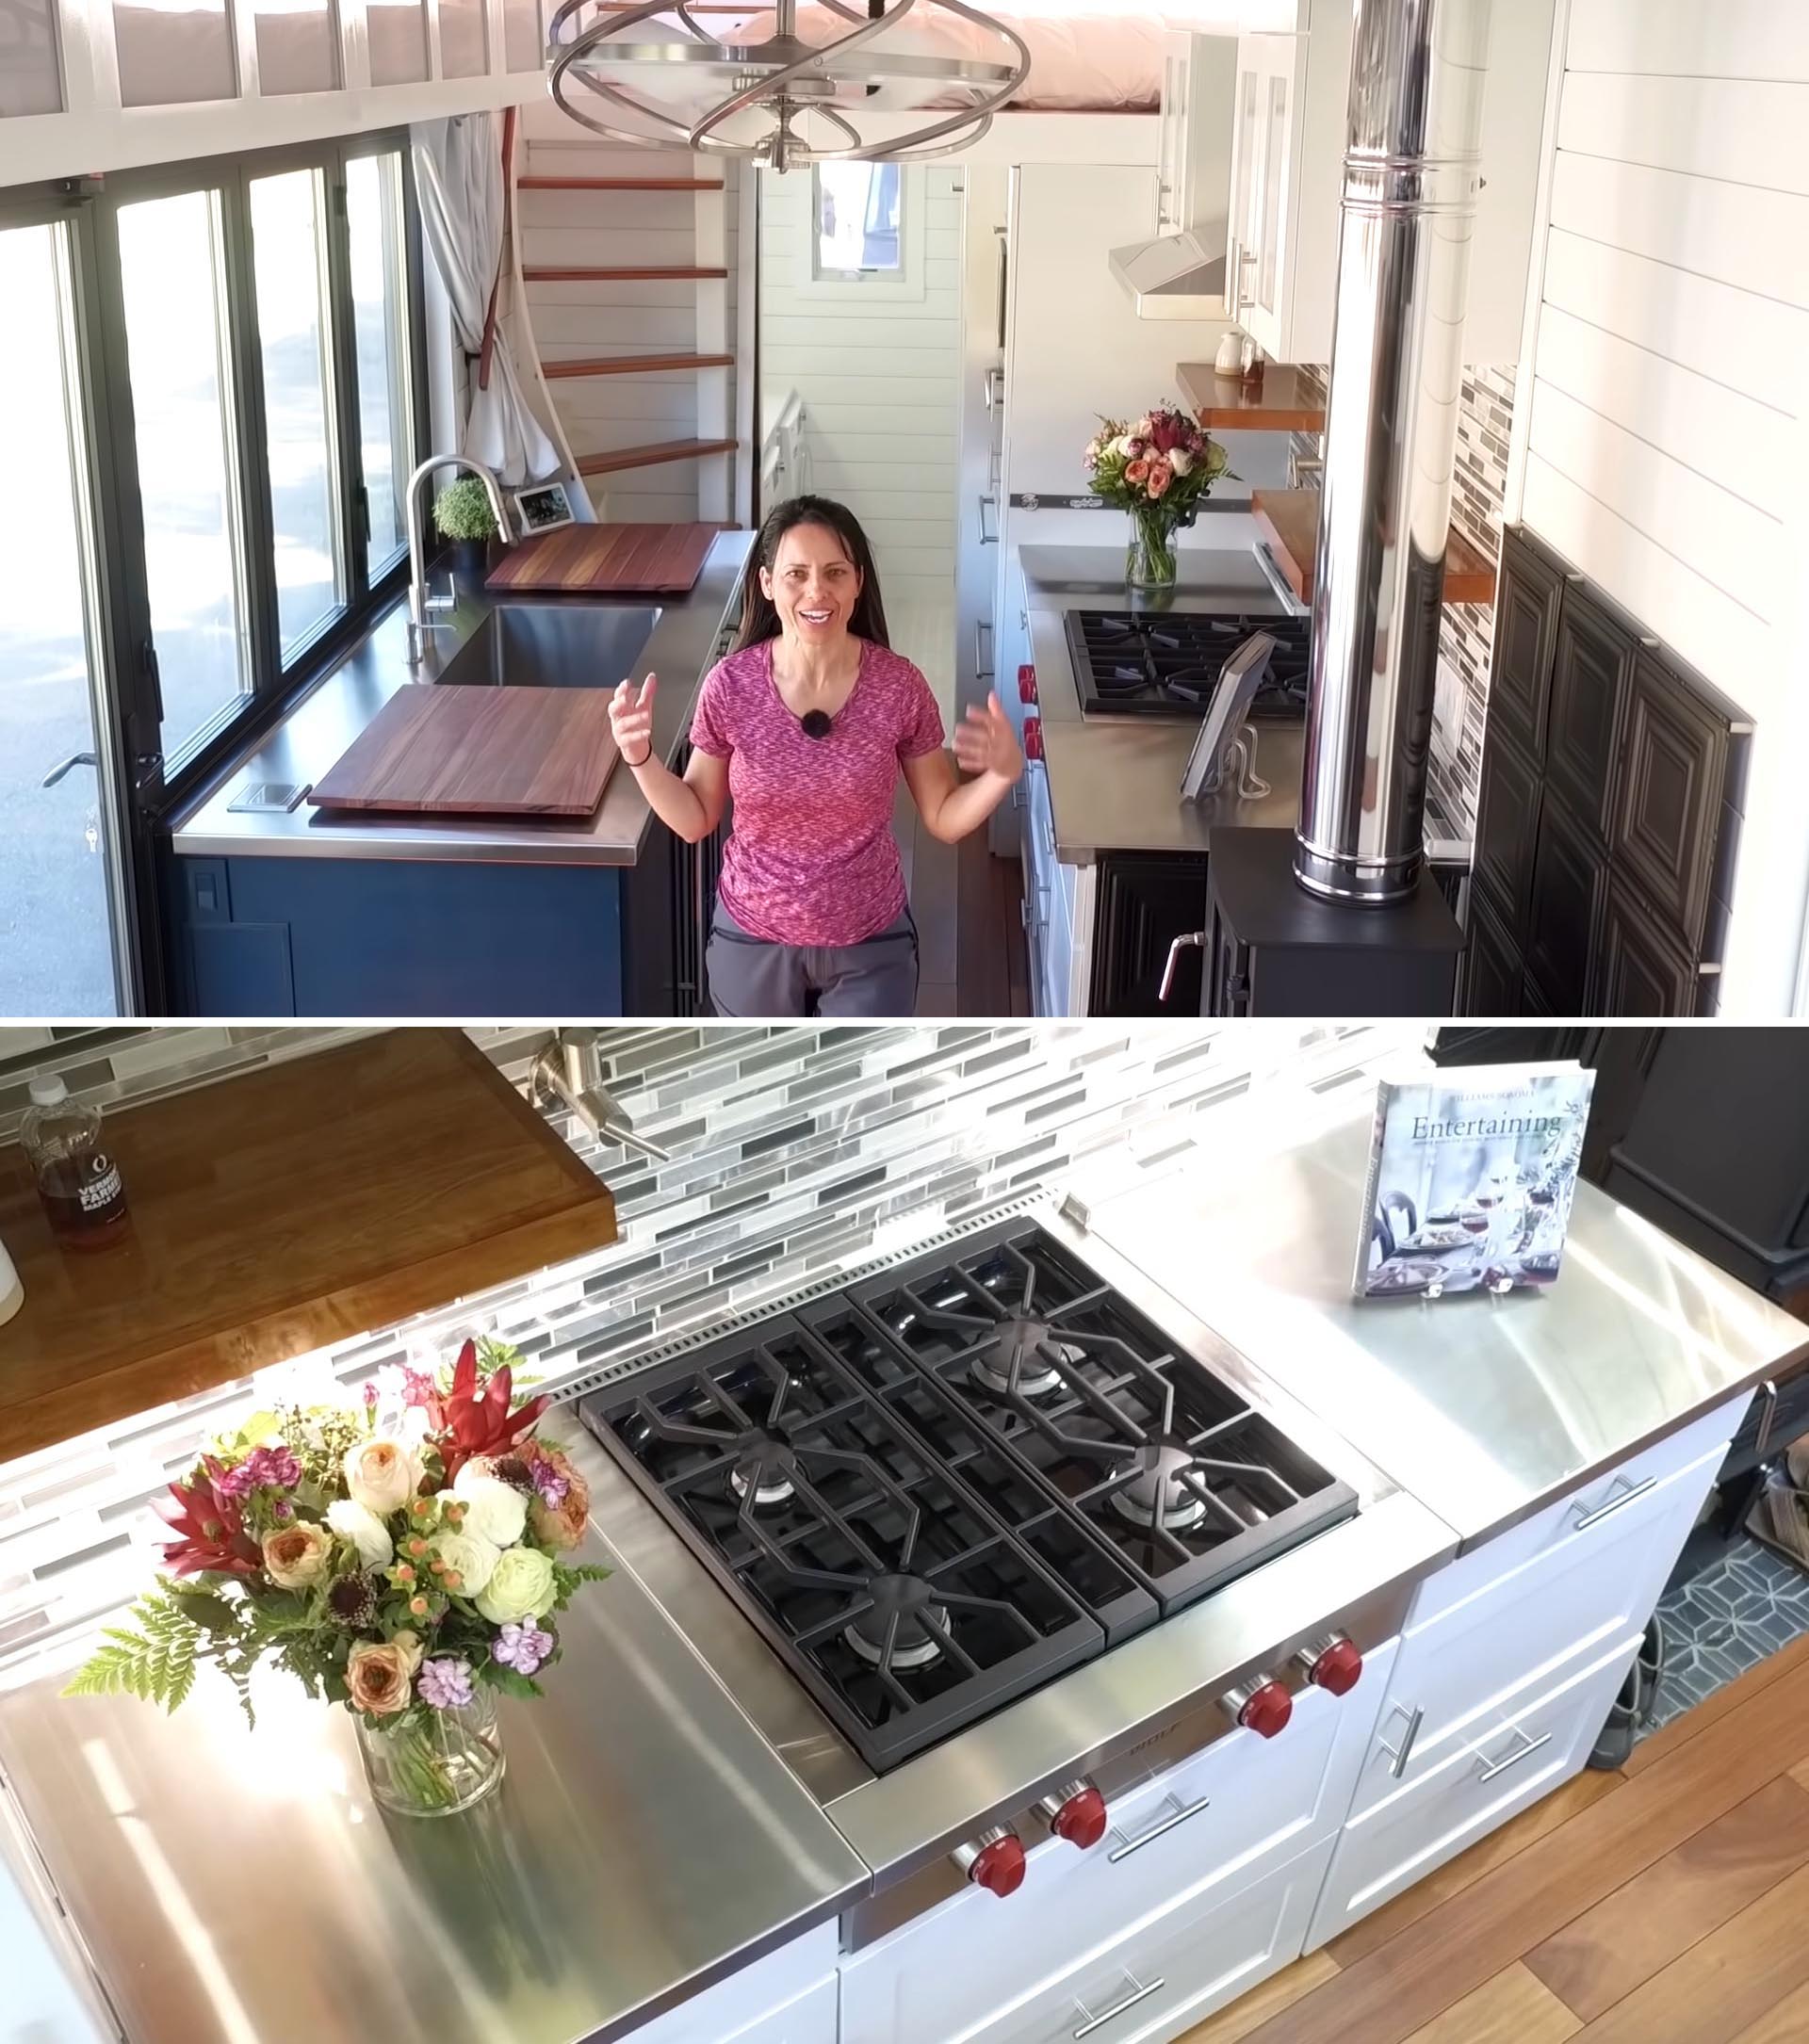 A tiny house kitchen with stainless steel countertops, full-size appliances, tile backsplash, and wood burning stove.